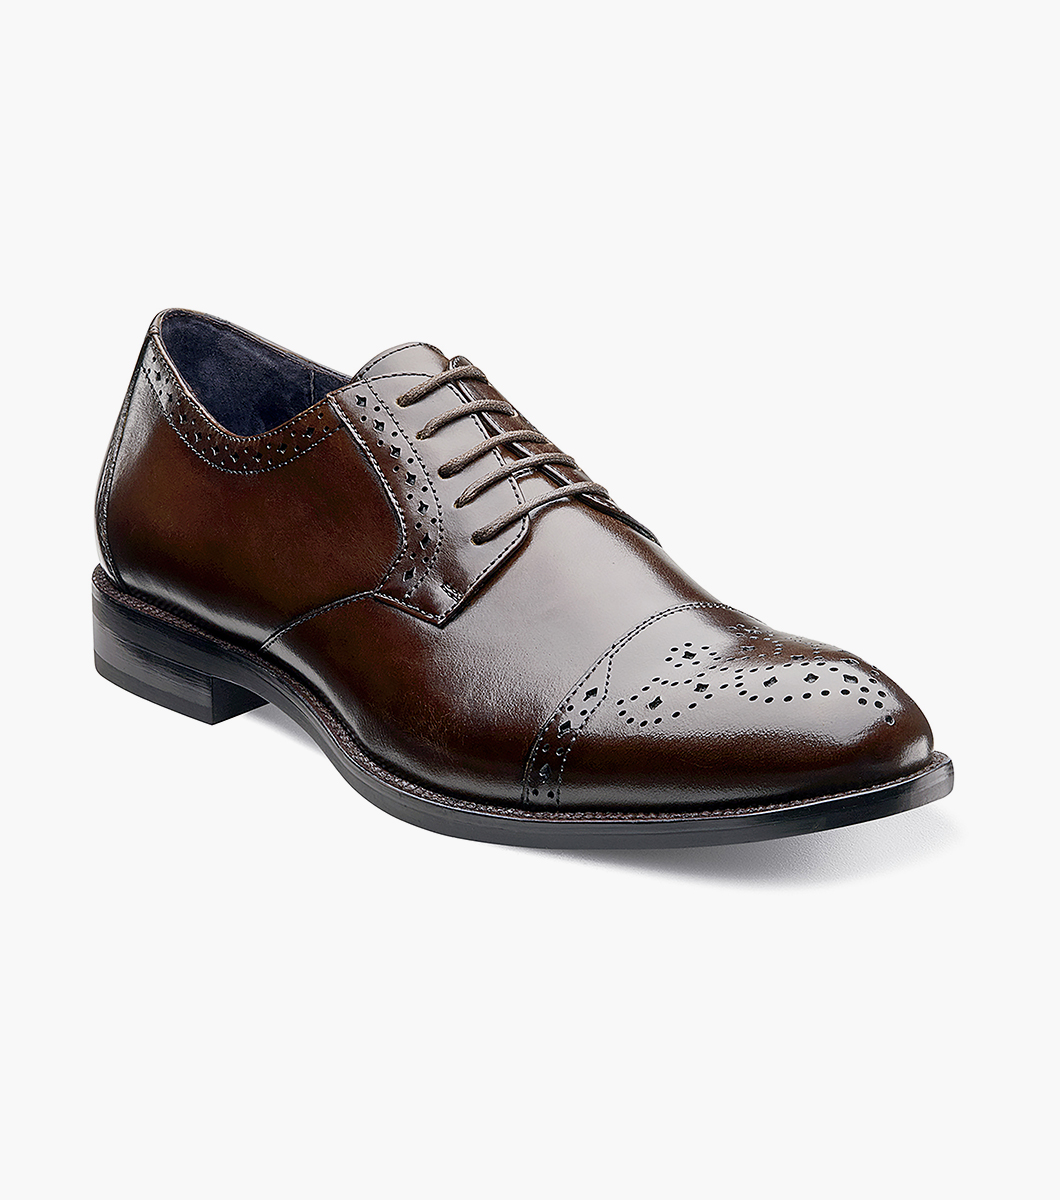 Clearance Shoes | Brown Cap Toe Oxford | Stacy Adams Granville